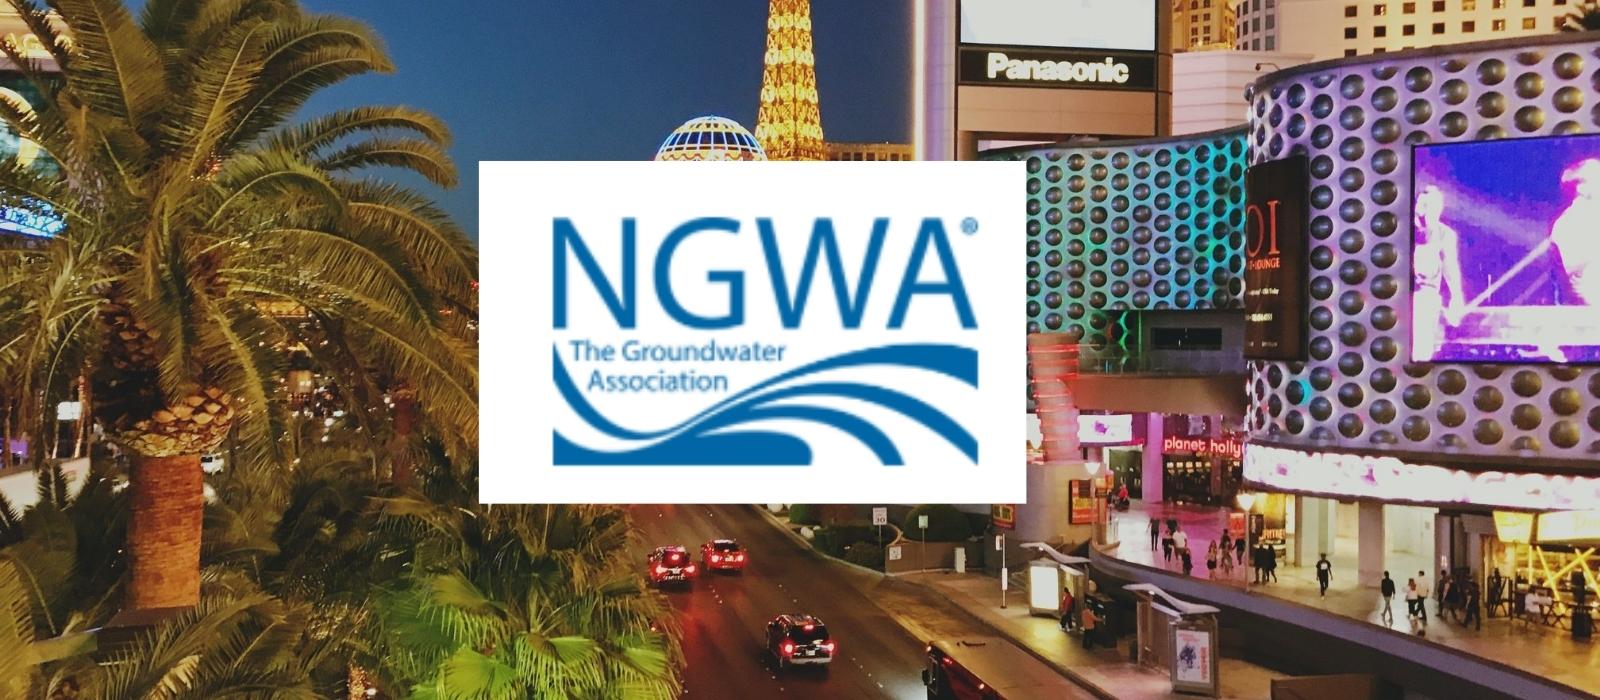 NATIONAL GROUND WATER ASSOCIATION (NGWA) EXPO & ANNUAL MEETING 2022